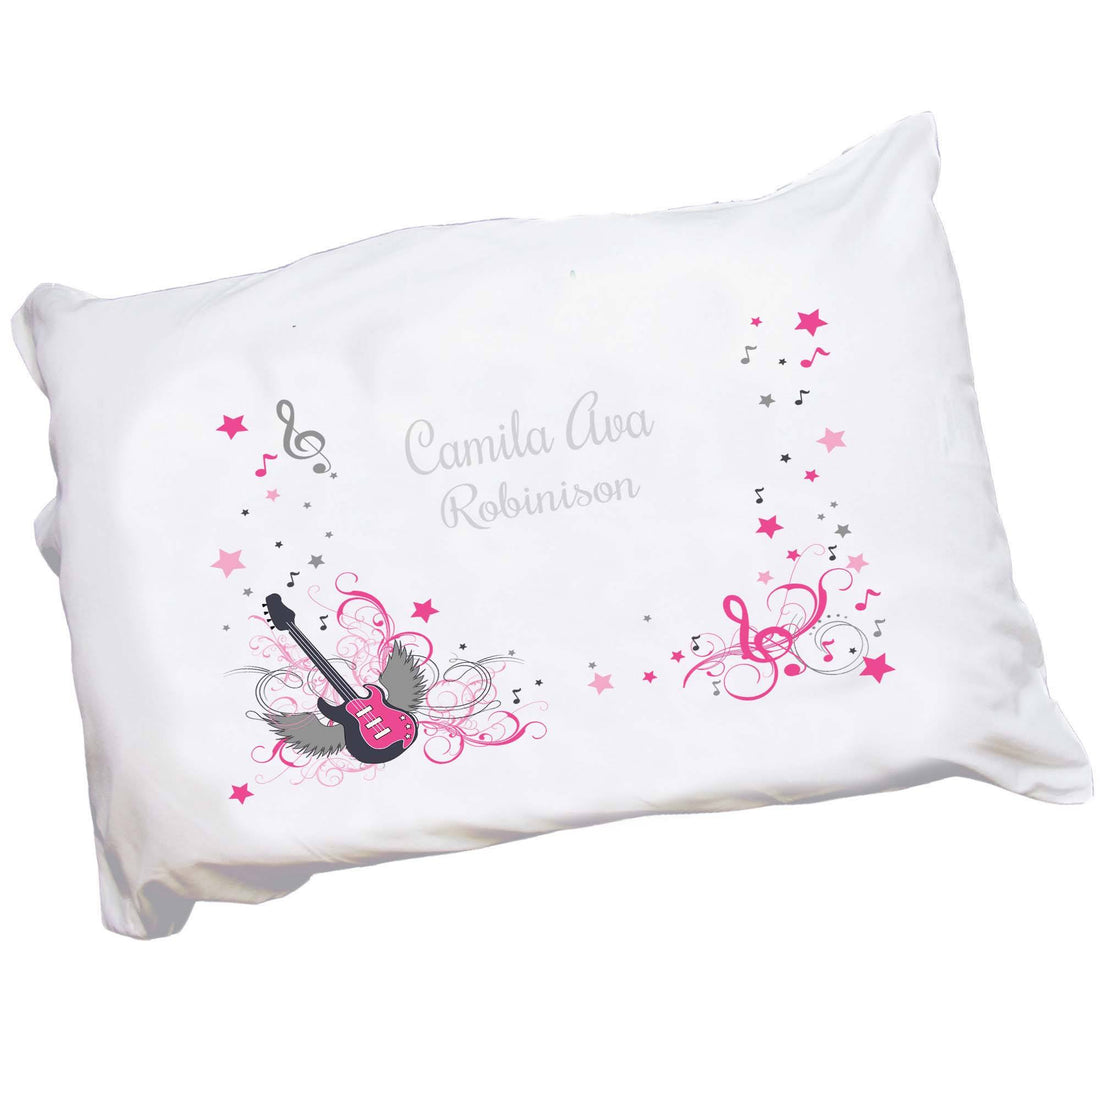 Personalized Childrens Pillowcase with Pink Rock Star design